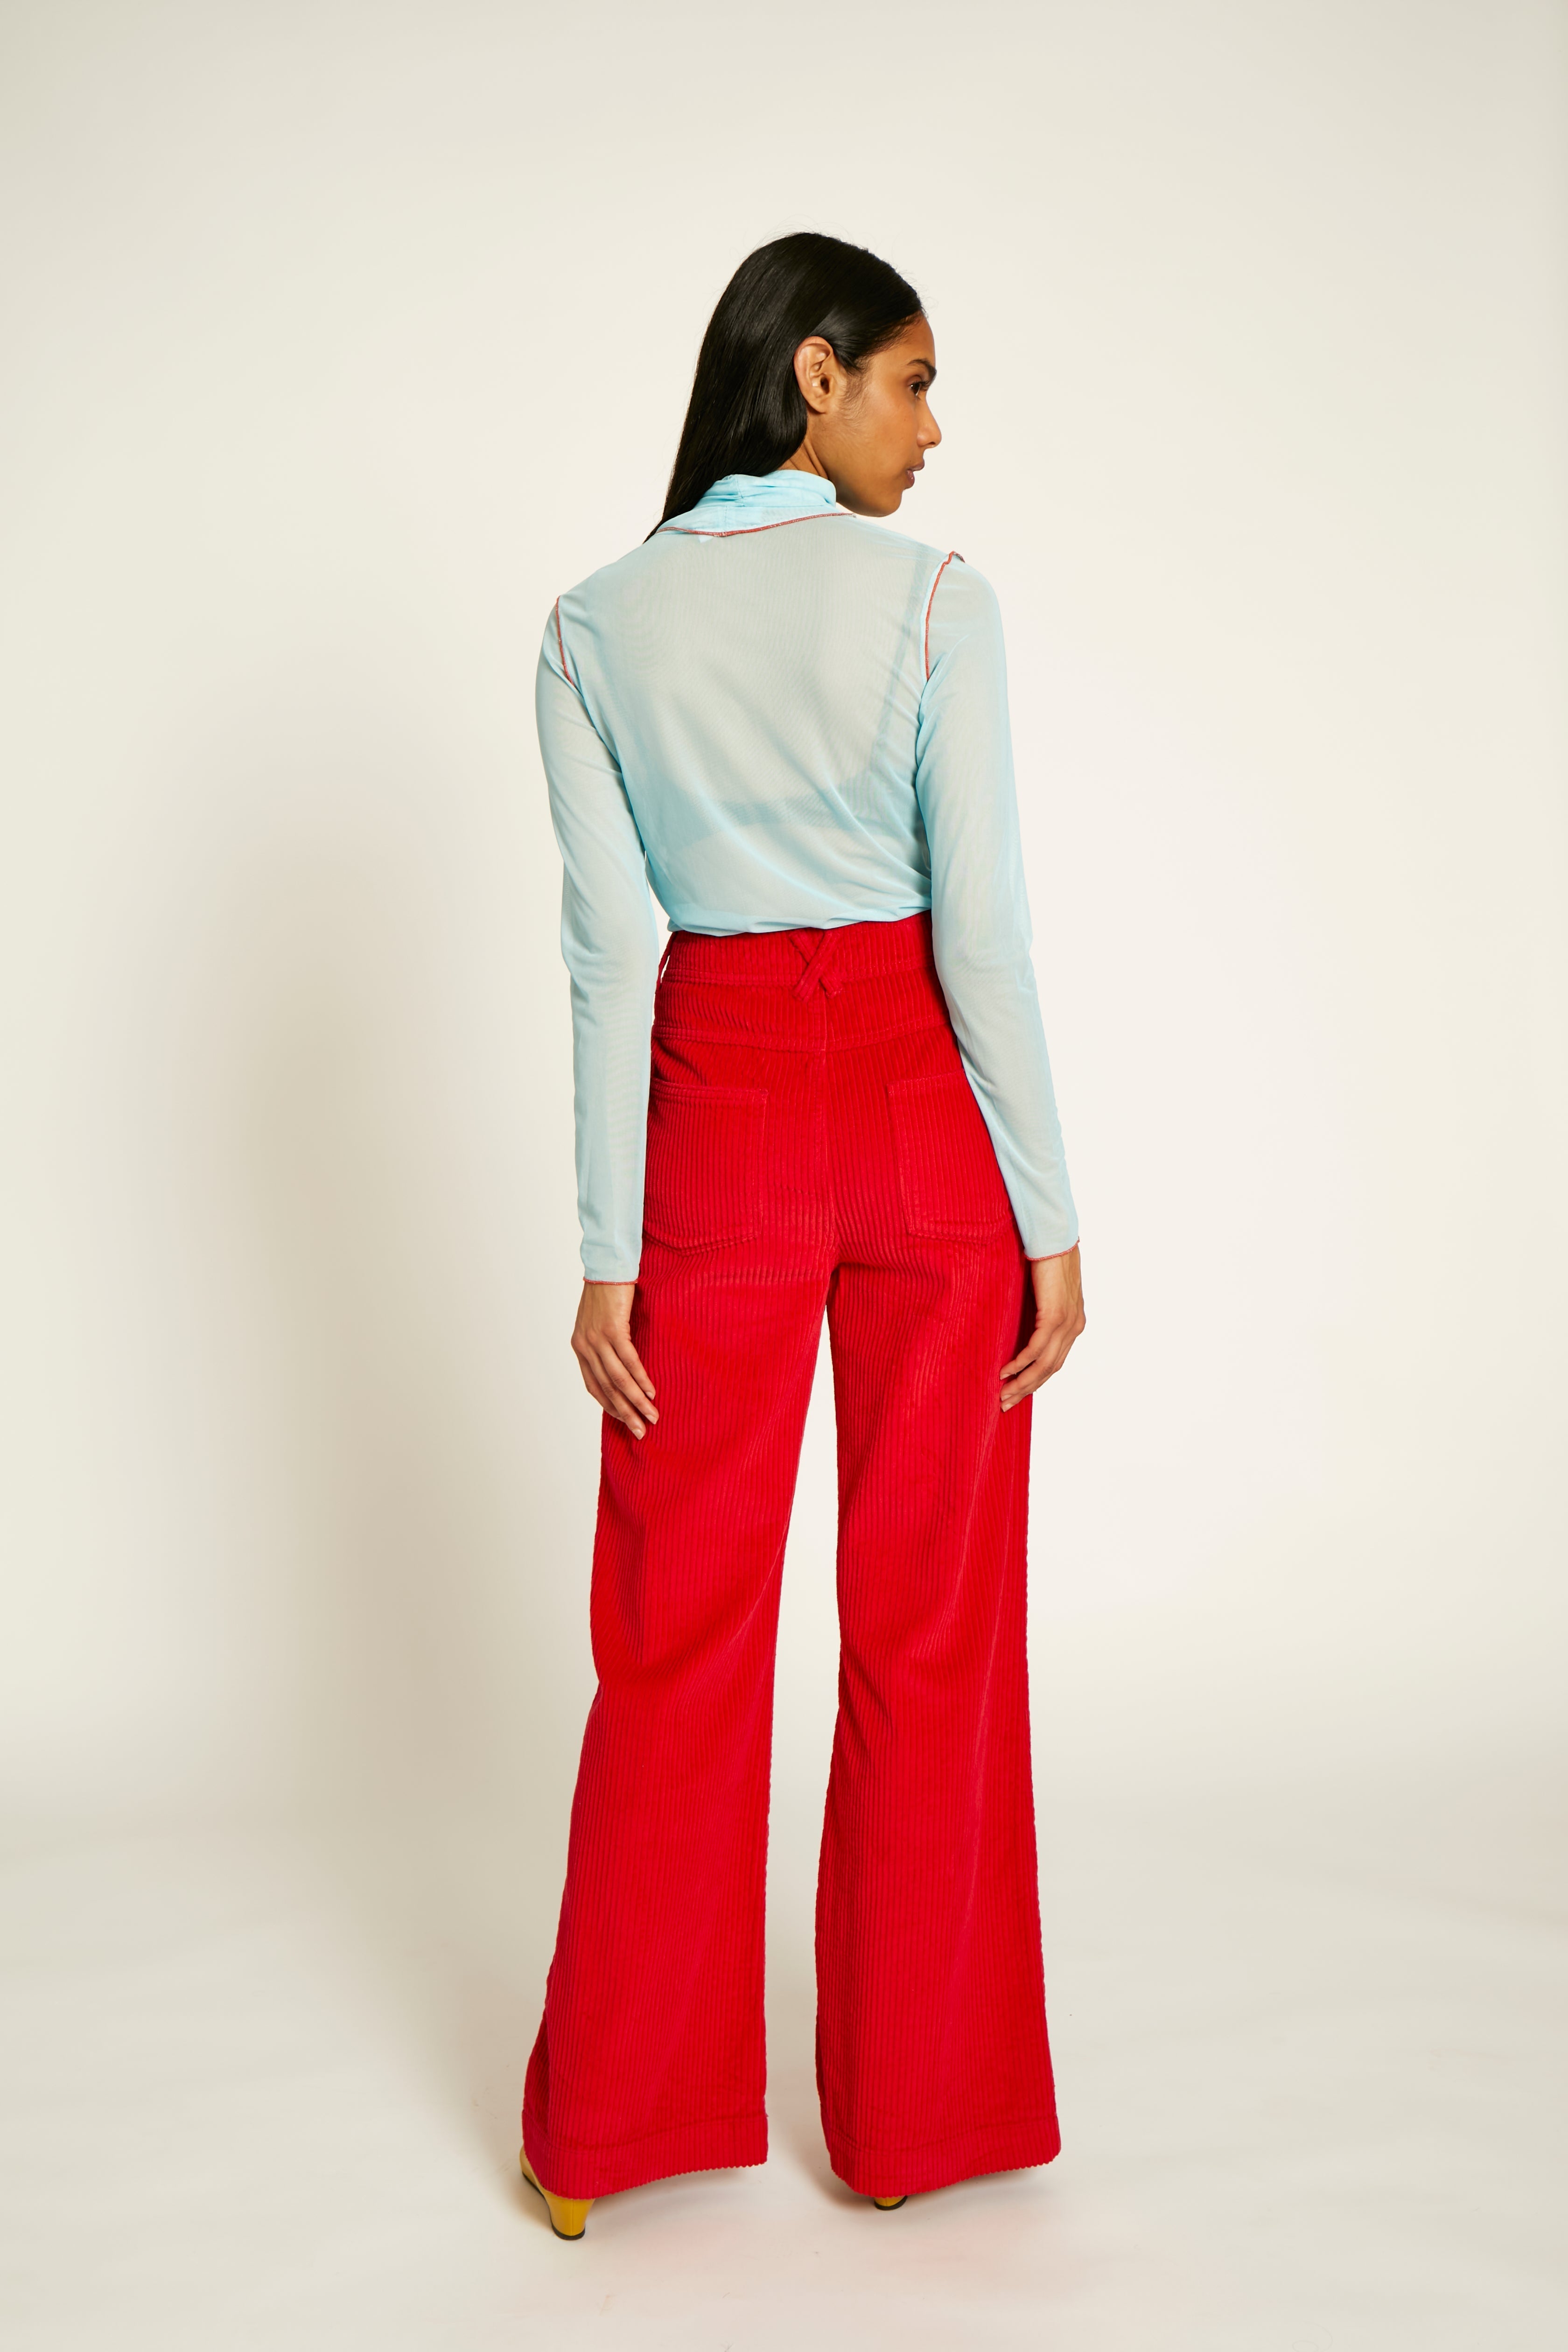 Buy Red Solid Palazzos Online - Shop for W